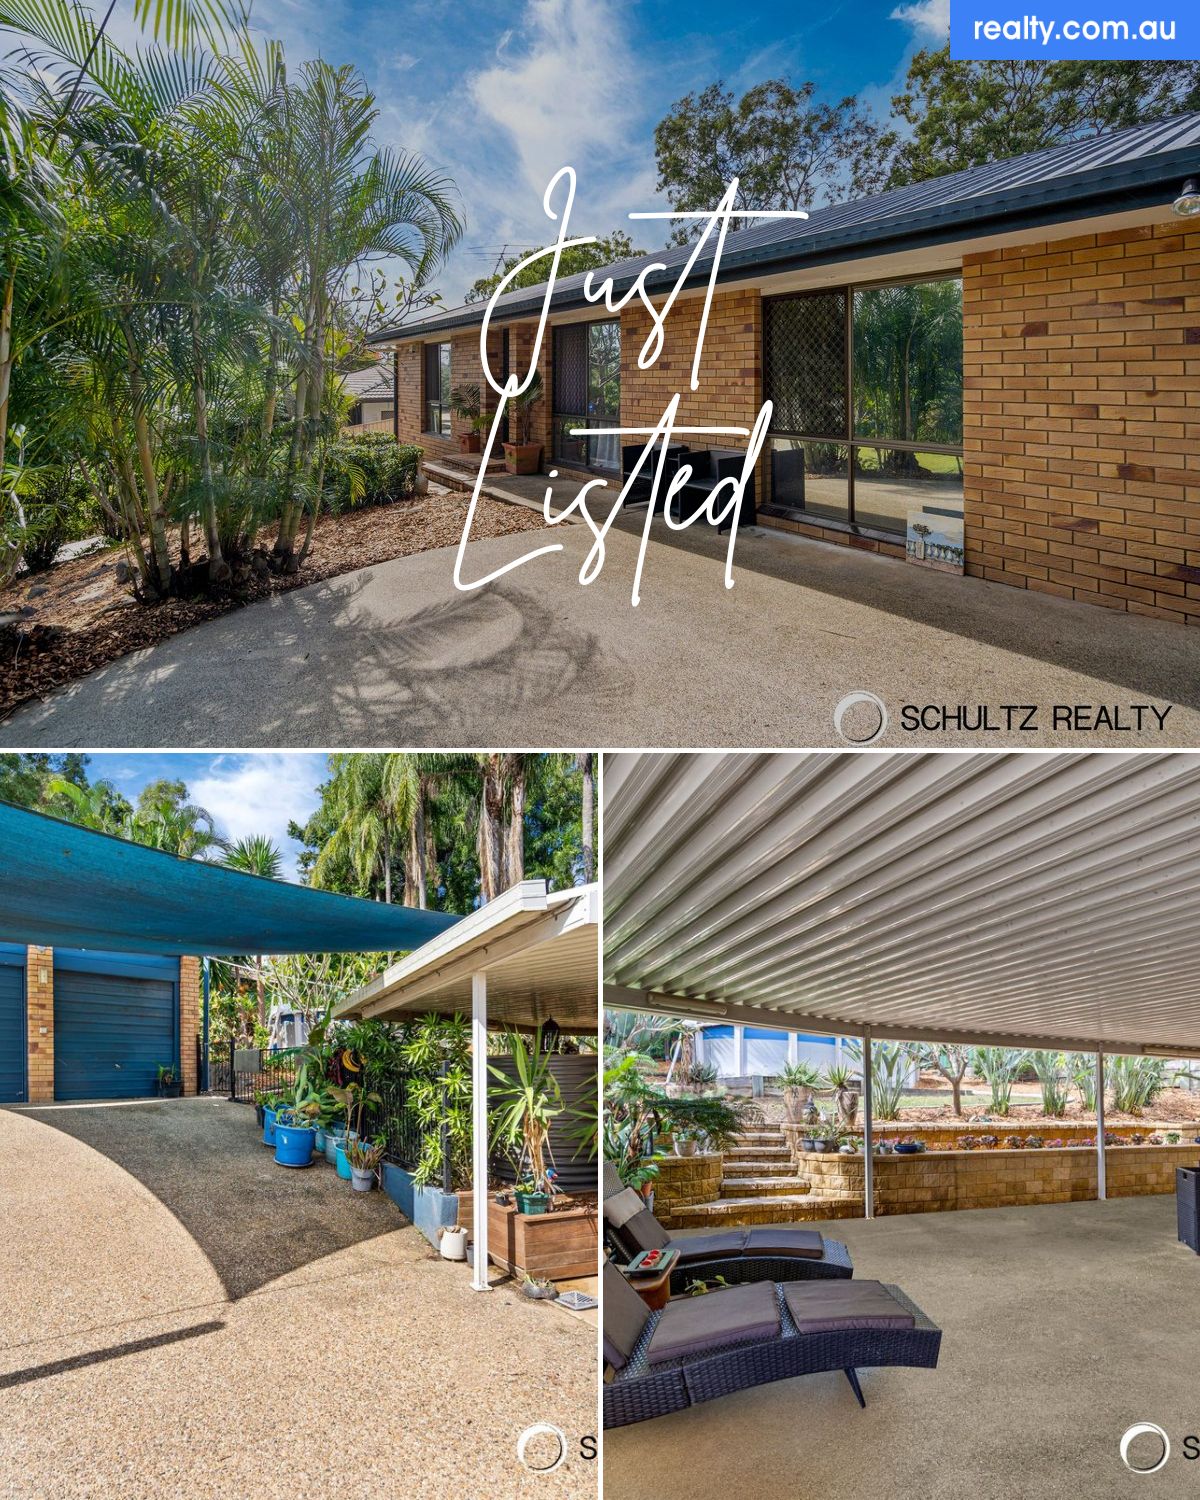 11 Willand Drive, Beenleigh, QLD 4207 | Realty.com.au